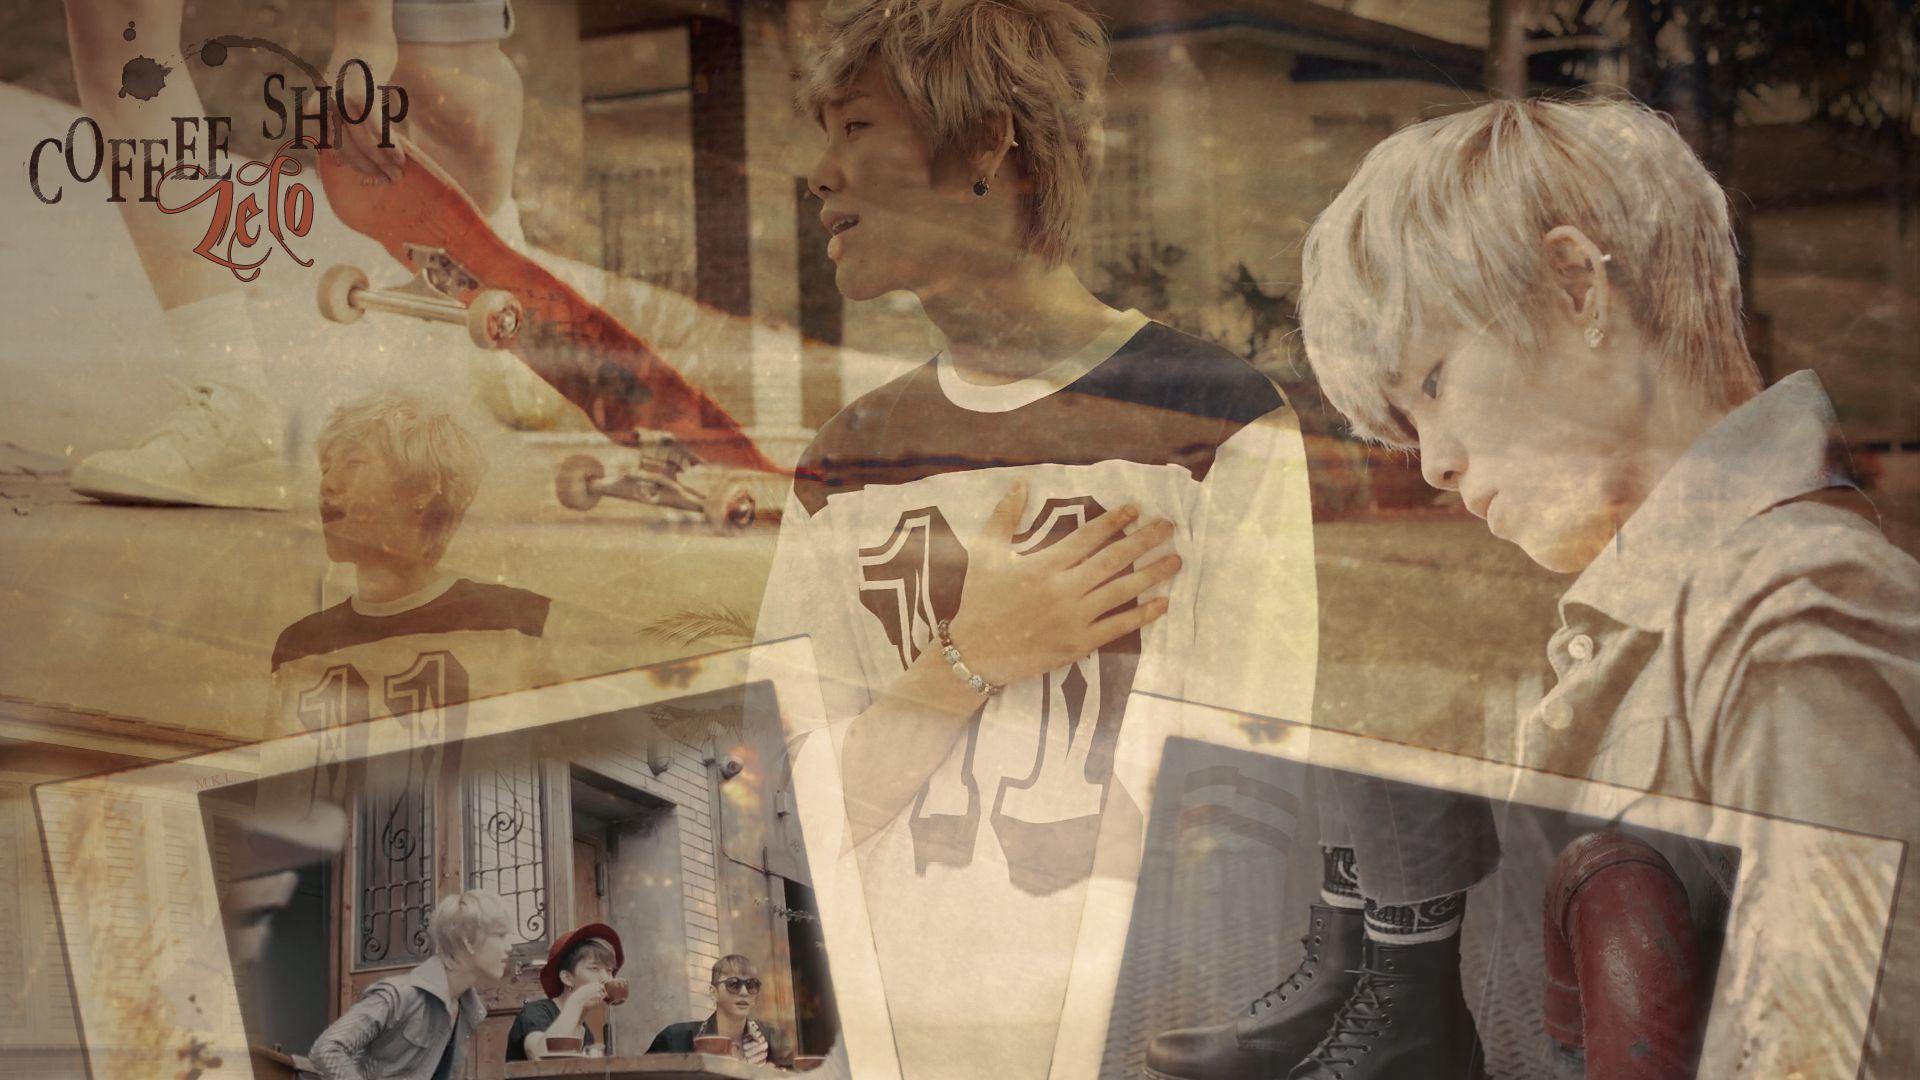 B.A.P image Coffee boutique HD fond d'écran and background